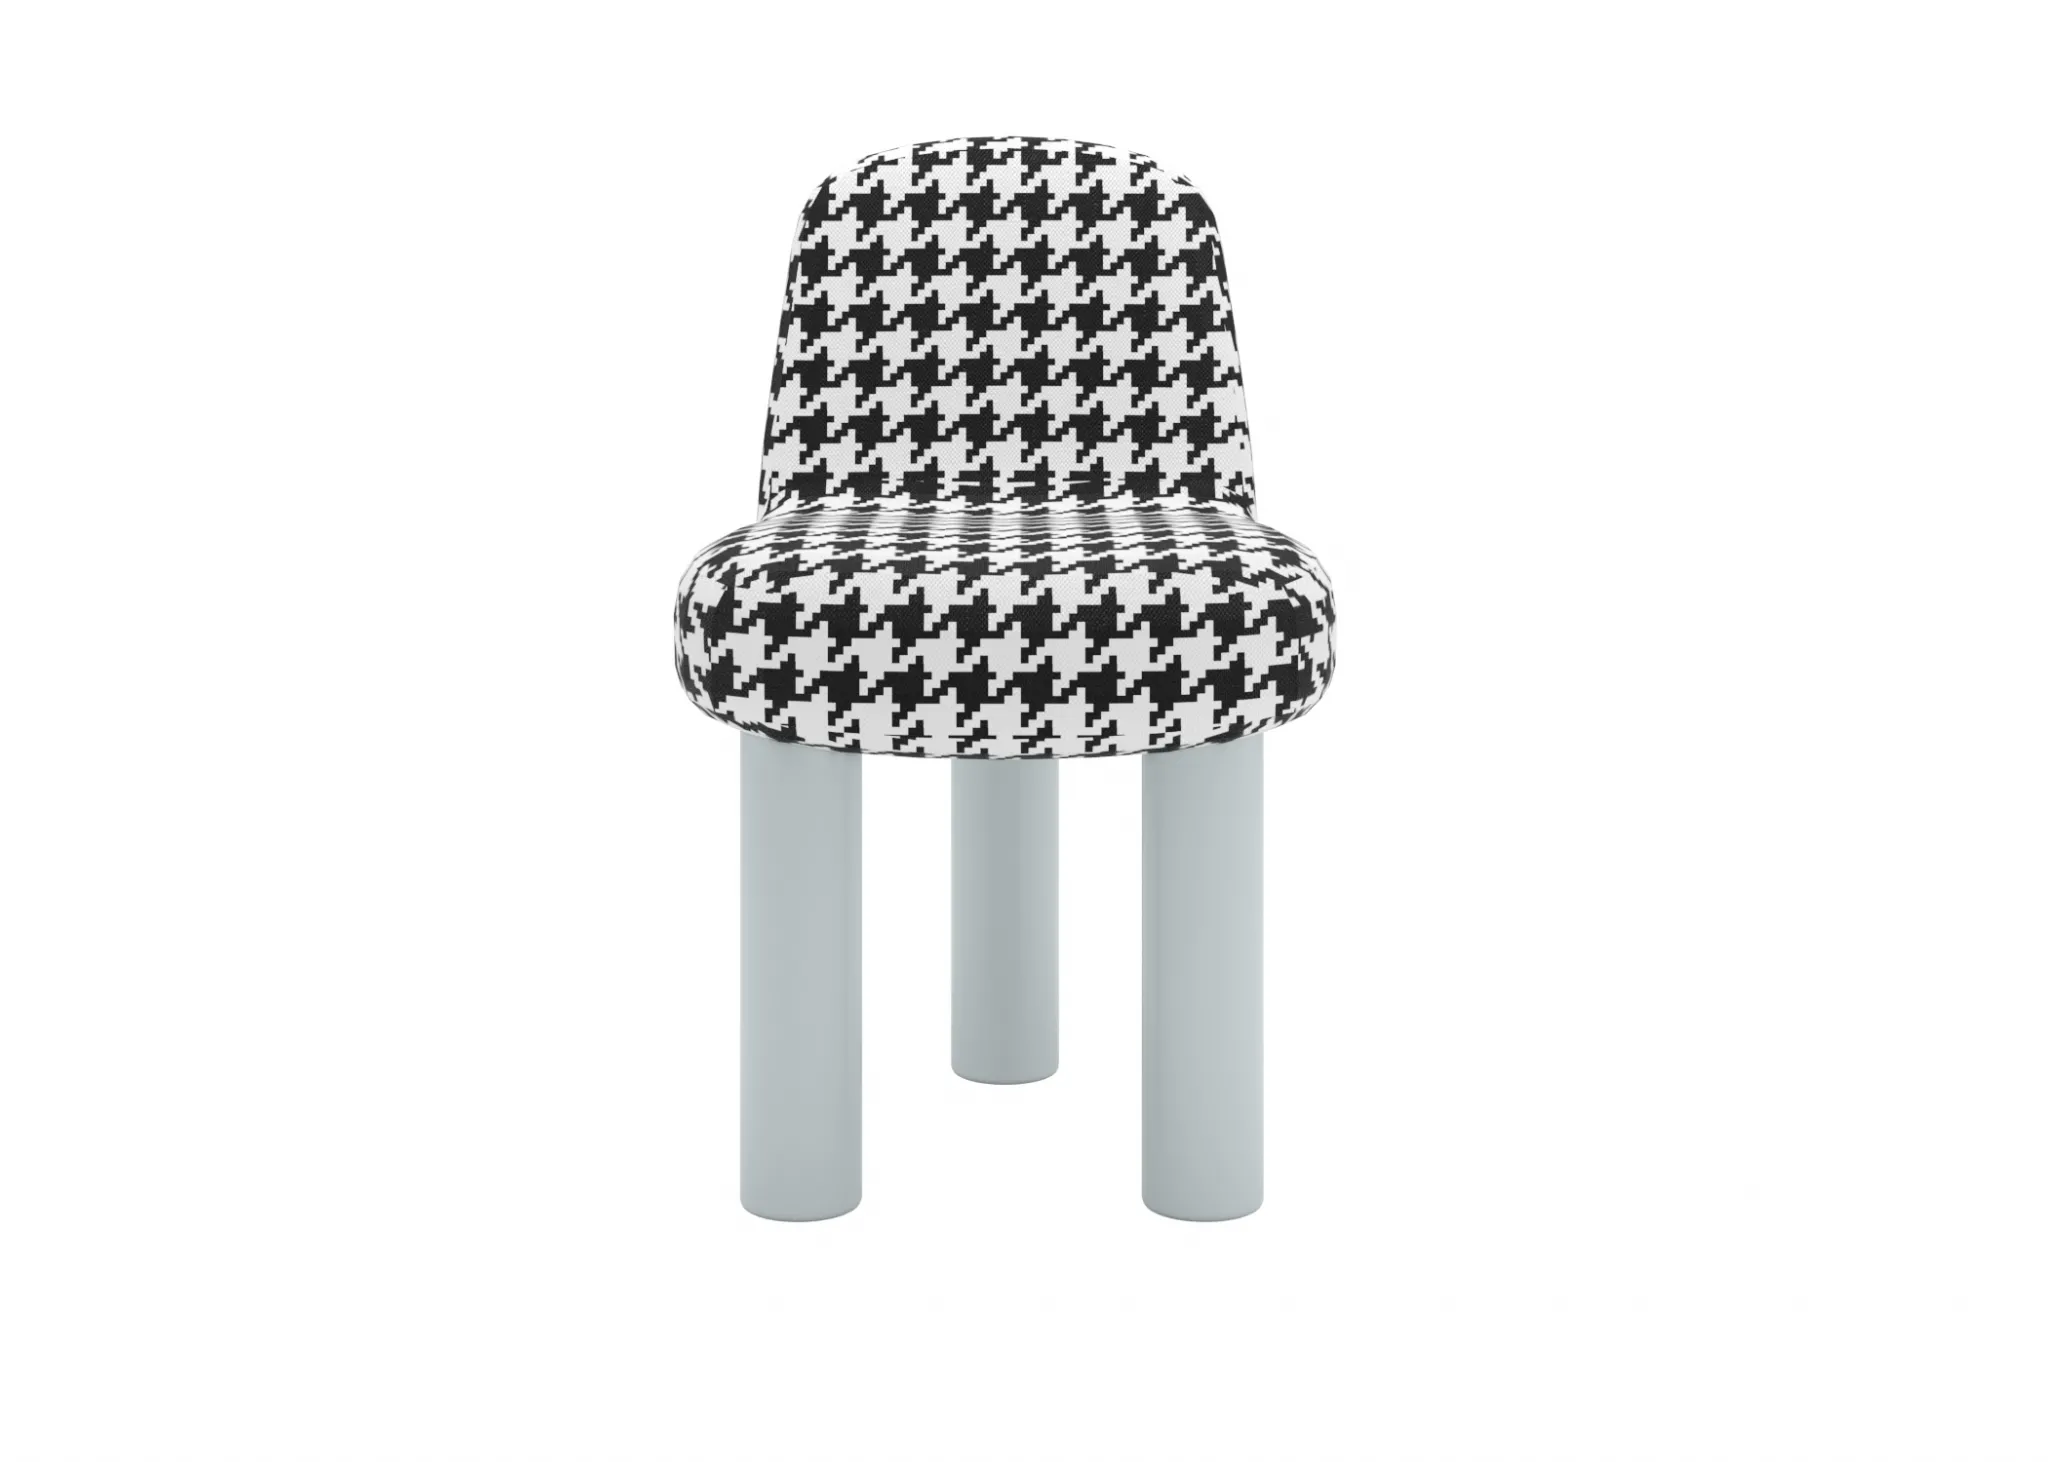 FURNITURE 3D MODELS – CHAIRS – 0419